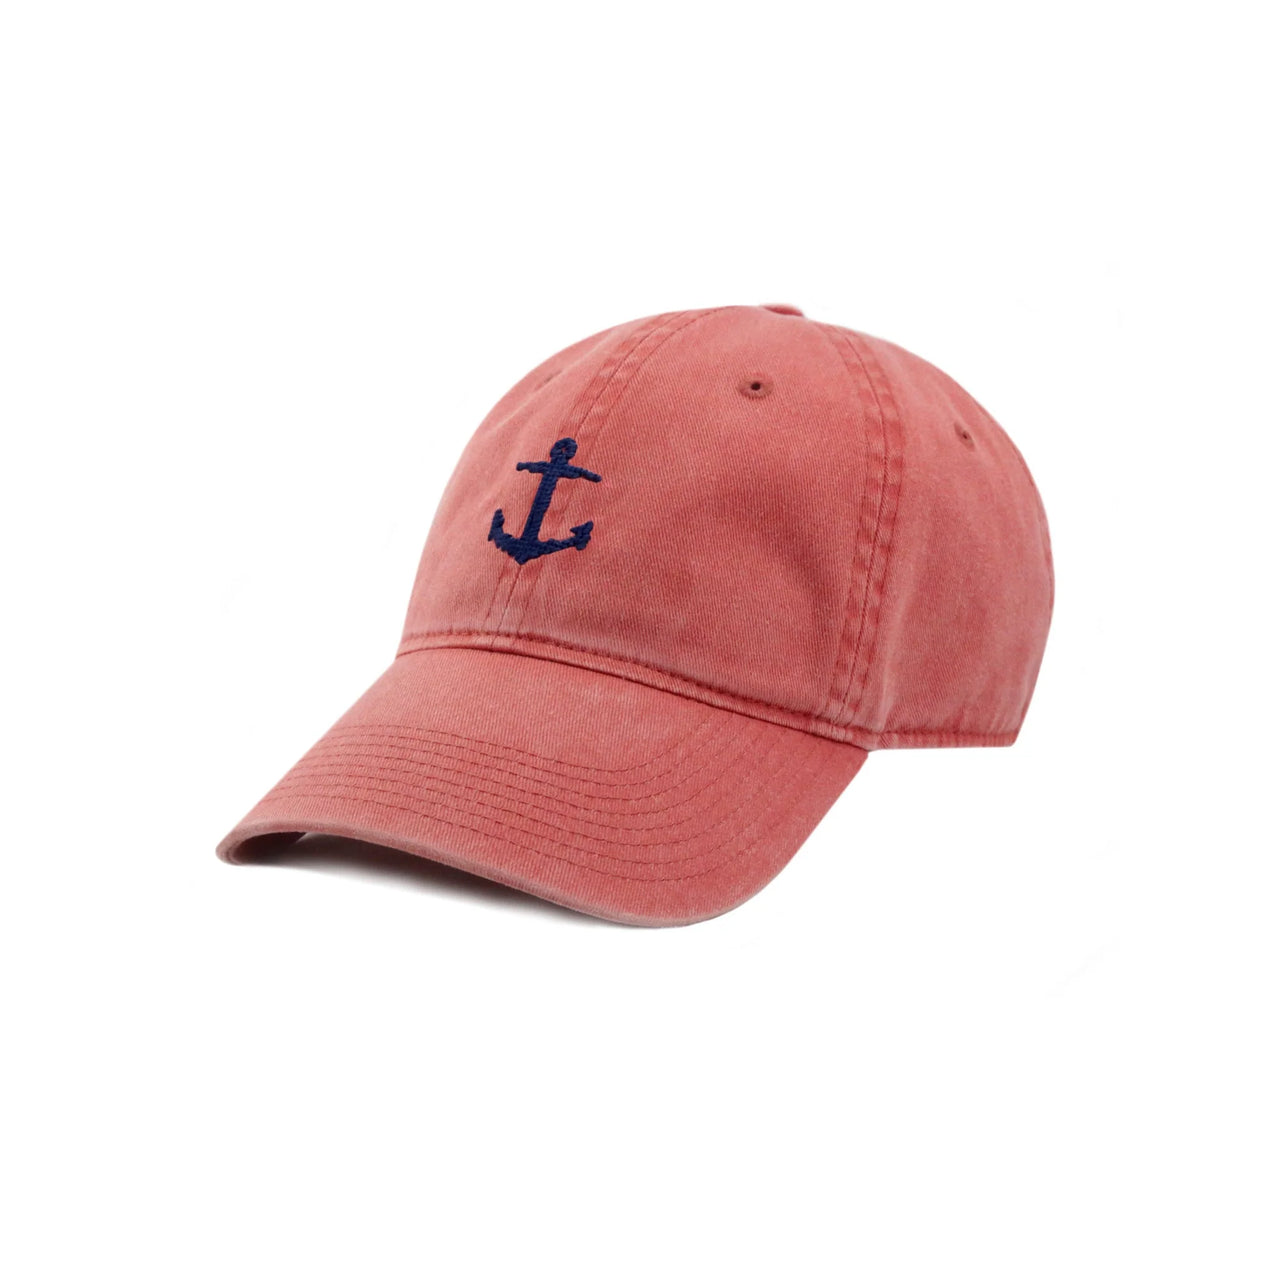 Smathers & Branson Anchor Hat (Nantucket Red)